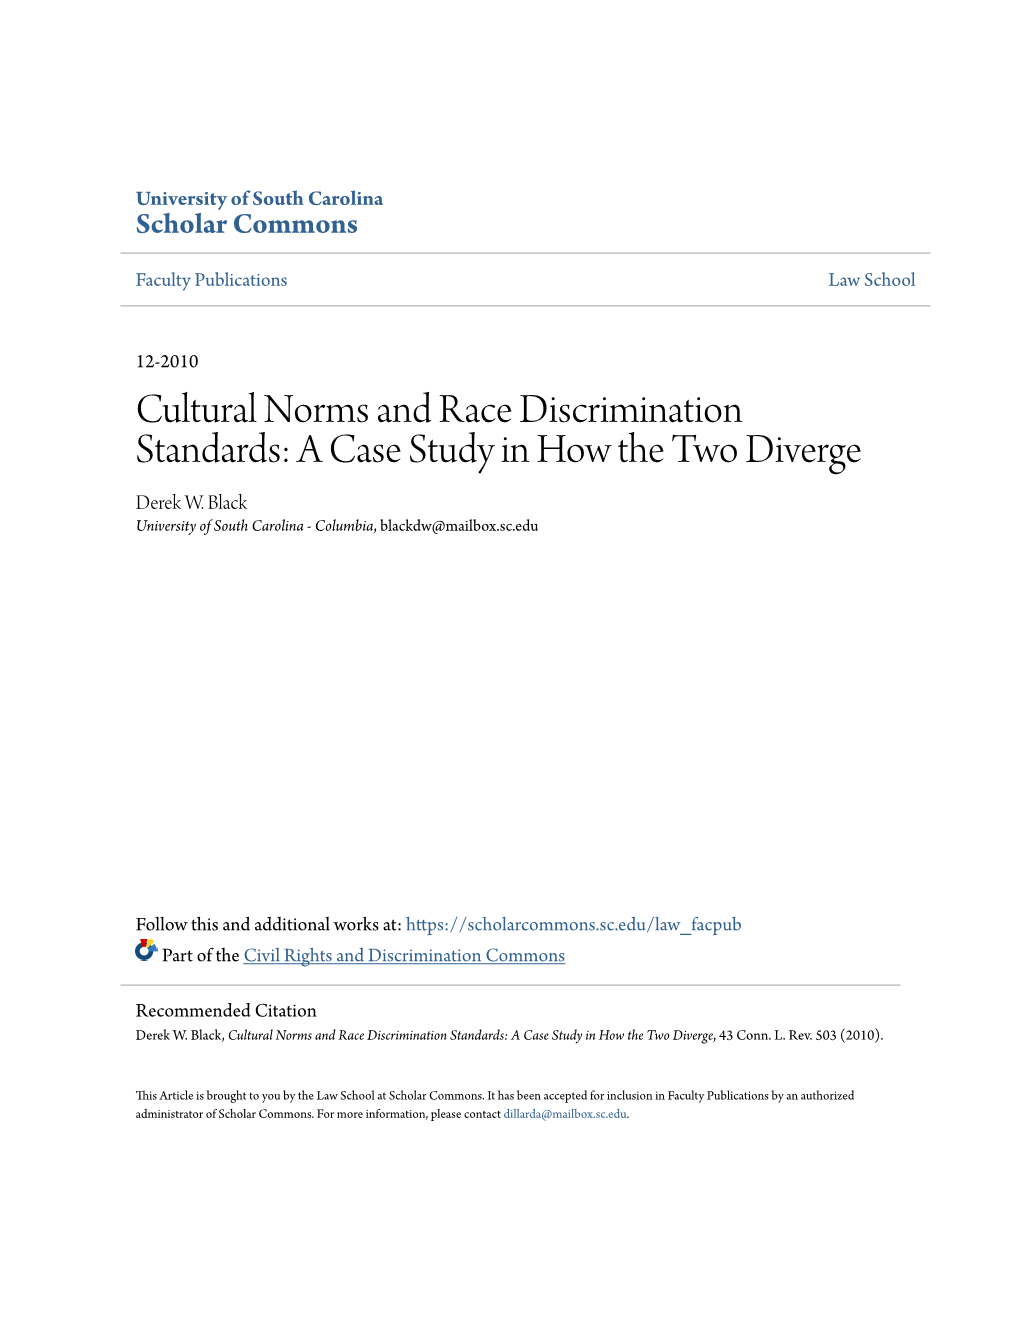 Cultural Norms and Race Discrimination Standards: a Case Study in How the Two Diverge Derek W